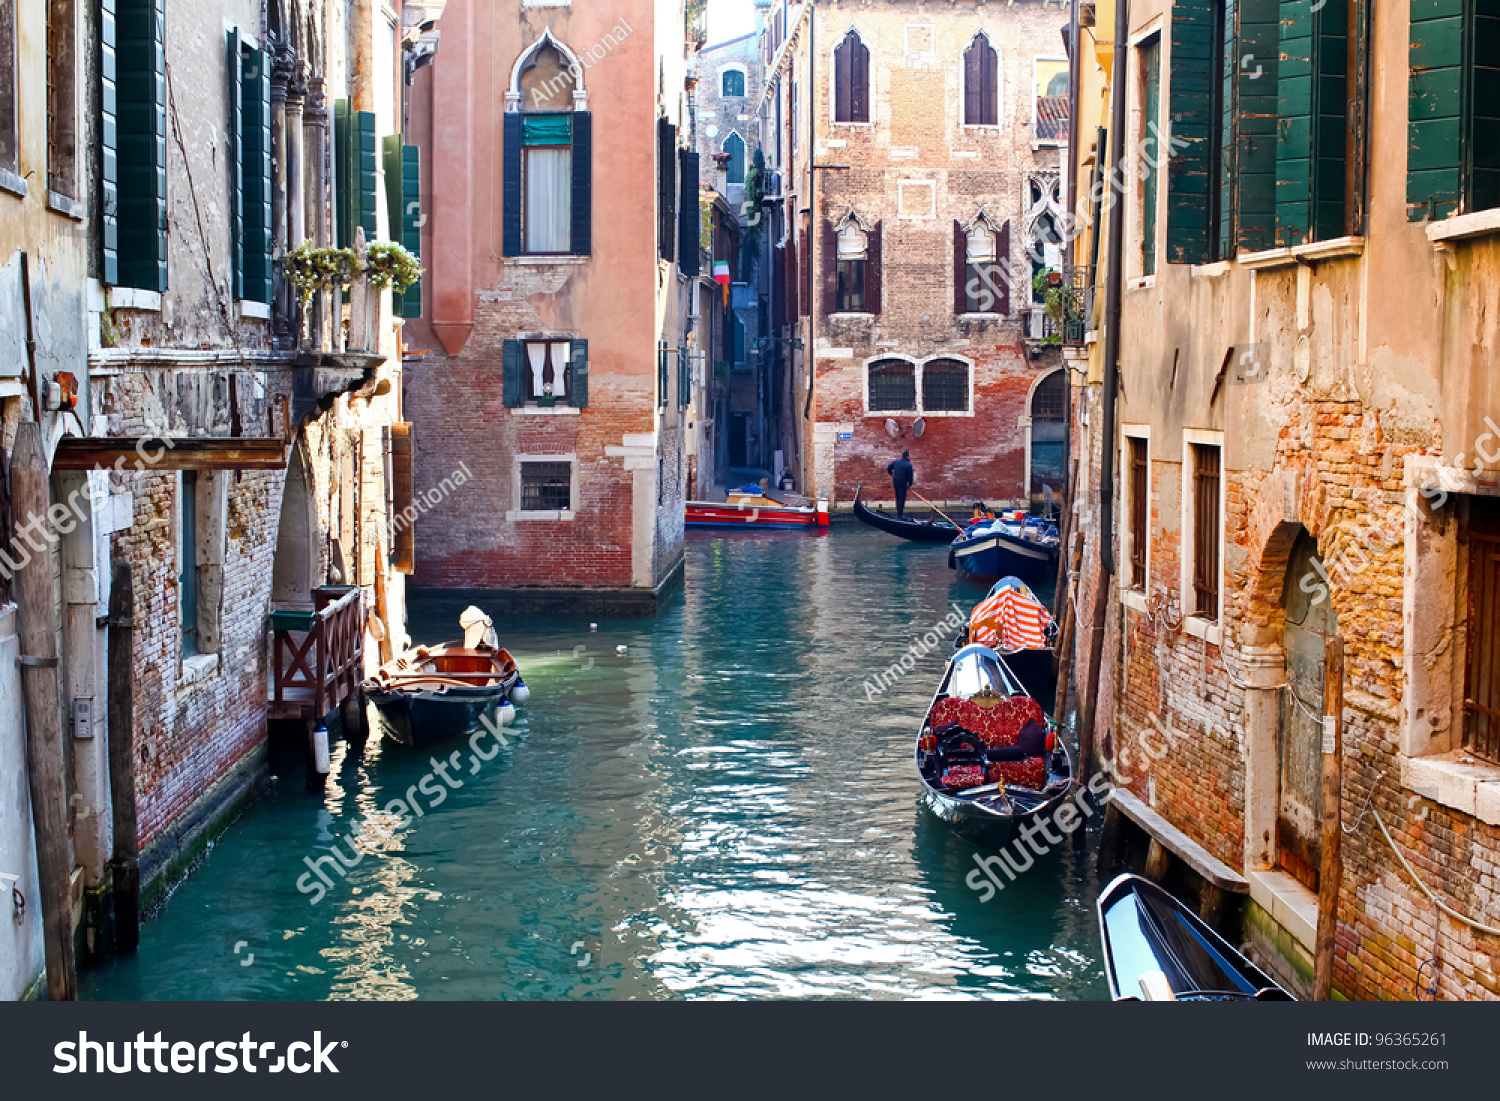 Beautiful colorful canal in Venice with parked gondolas near traditional architecture, Italy #96365261